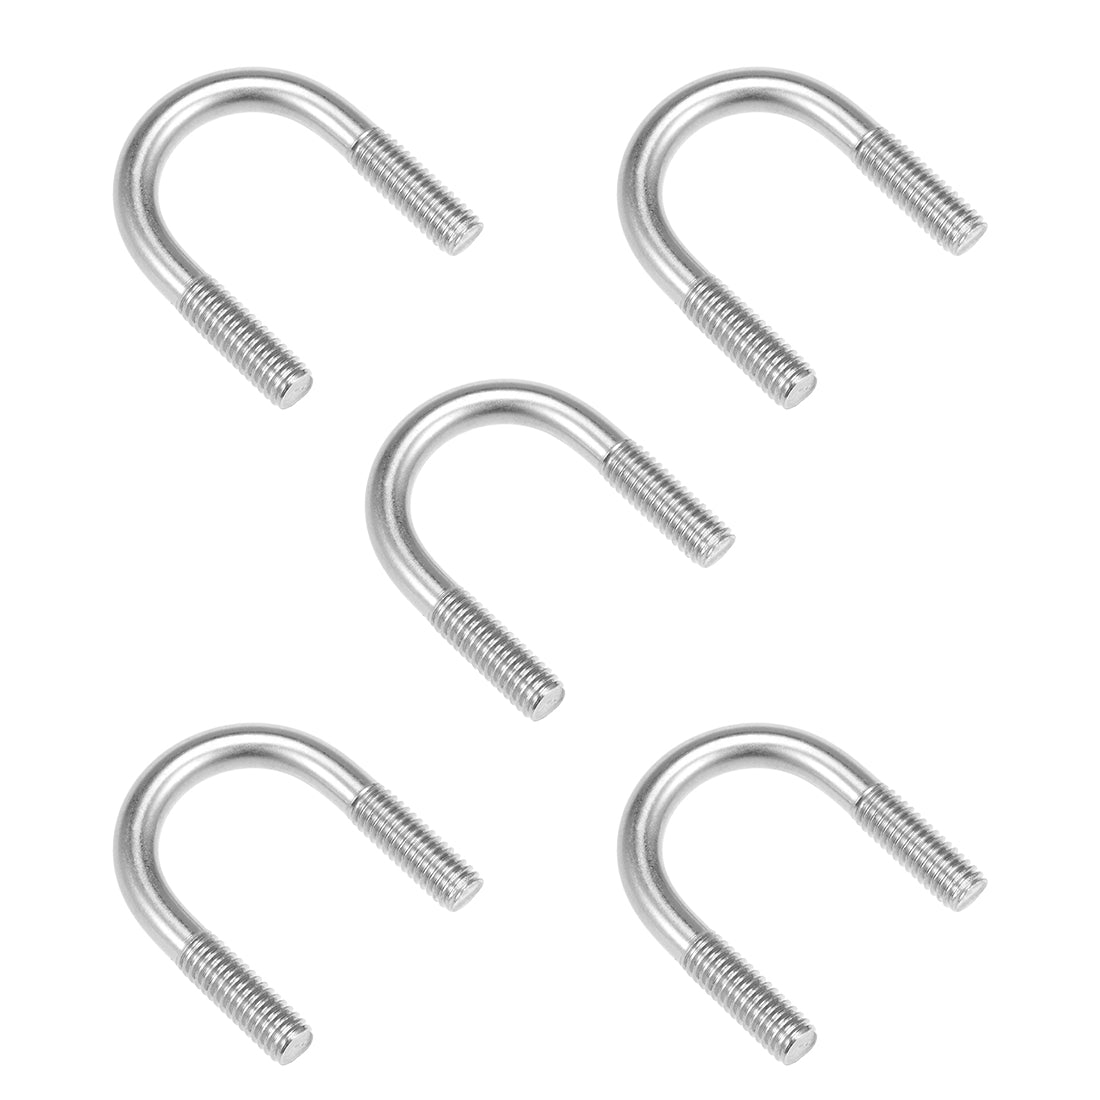 uxcell Uxcell U-Bolts 21mm Inner Width 304 Stainless Steel M6 U-Bolt for 18mm Pipe Dia 5pcs